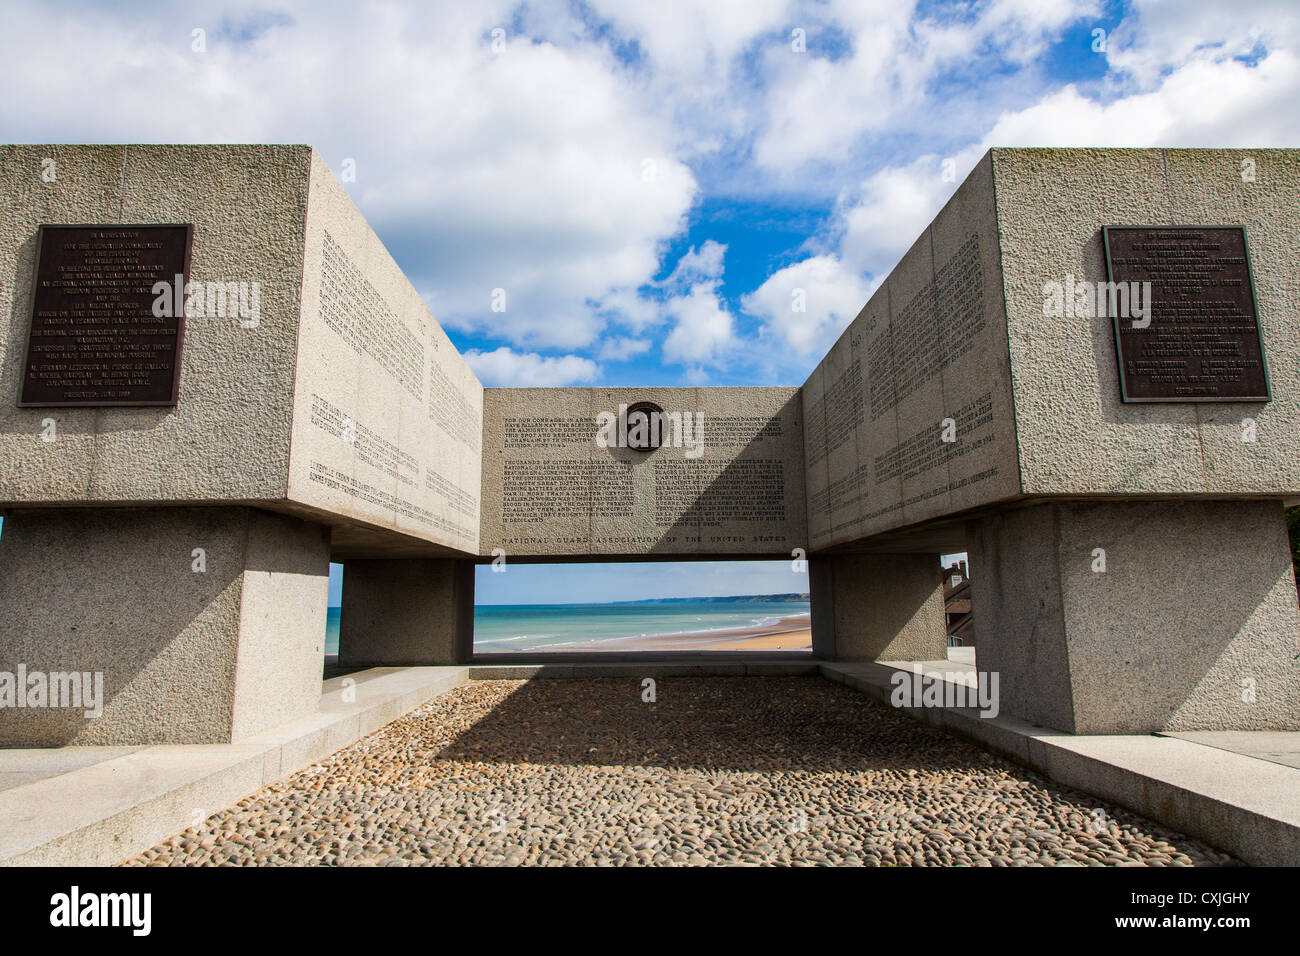 US National Guard memorial in Vierville Sur Mer, Omaha Beach, Normandy, France, to commemorate the D-Day landings. Stock Photo